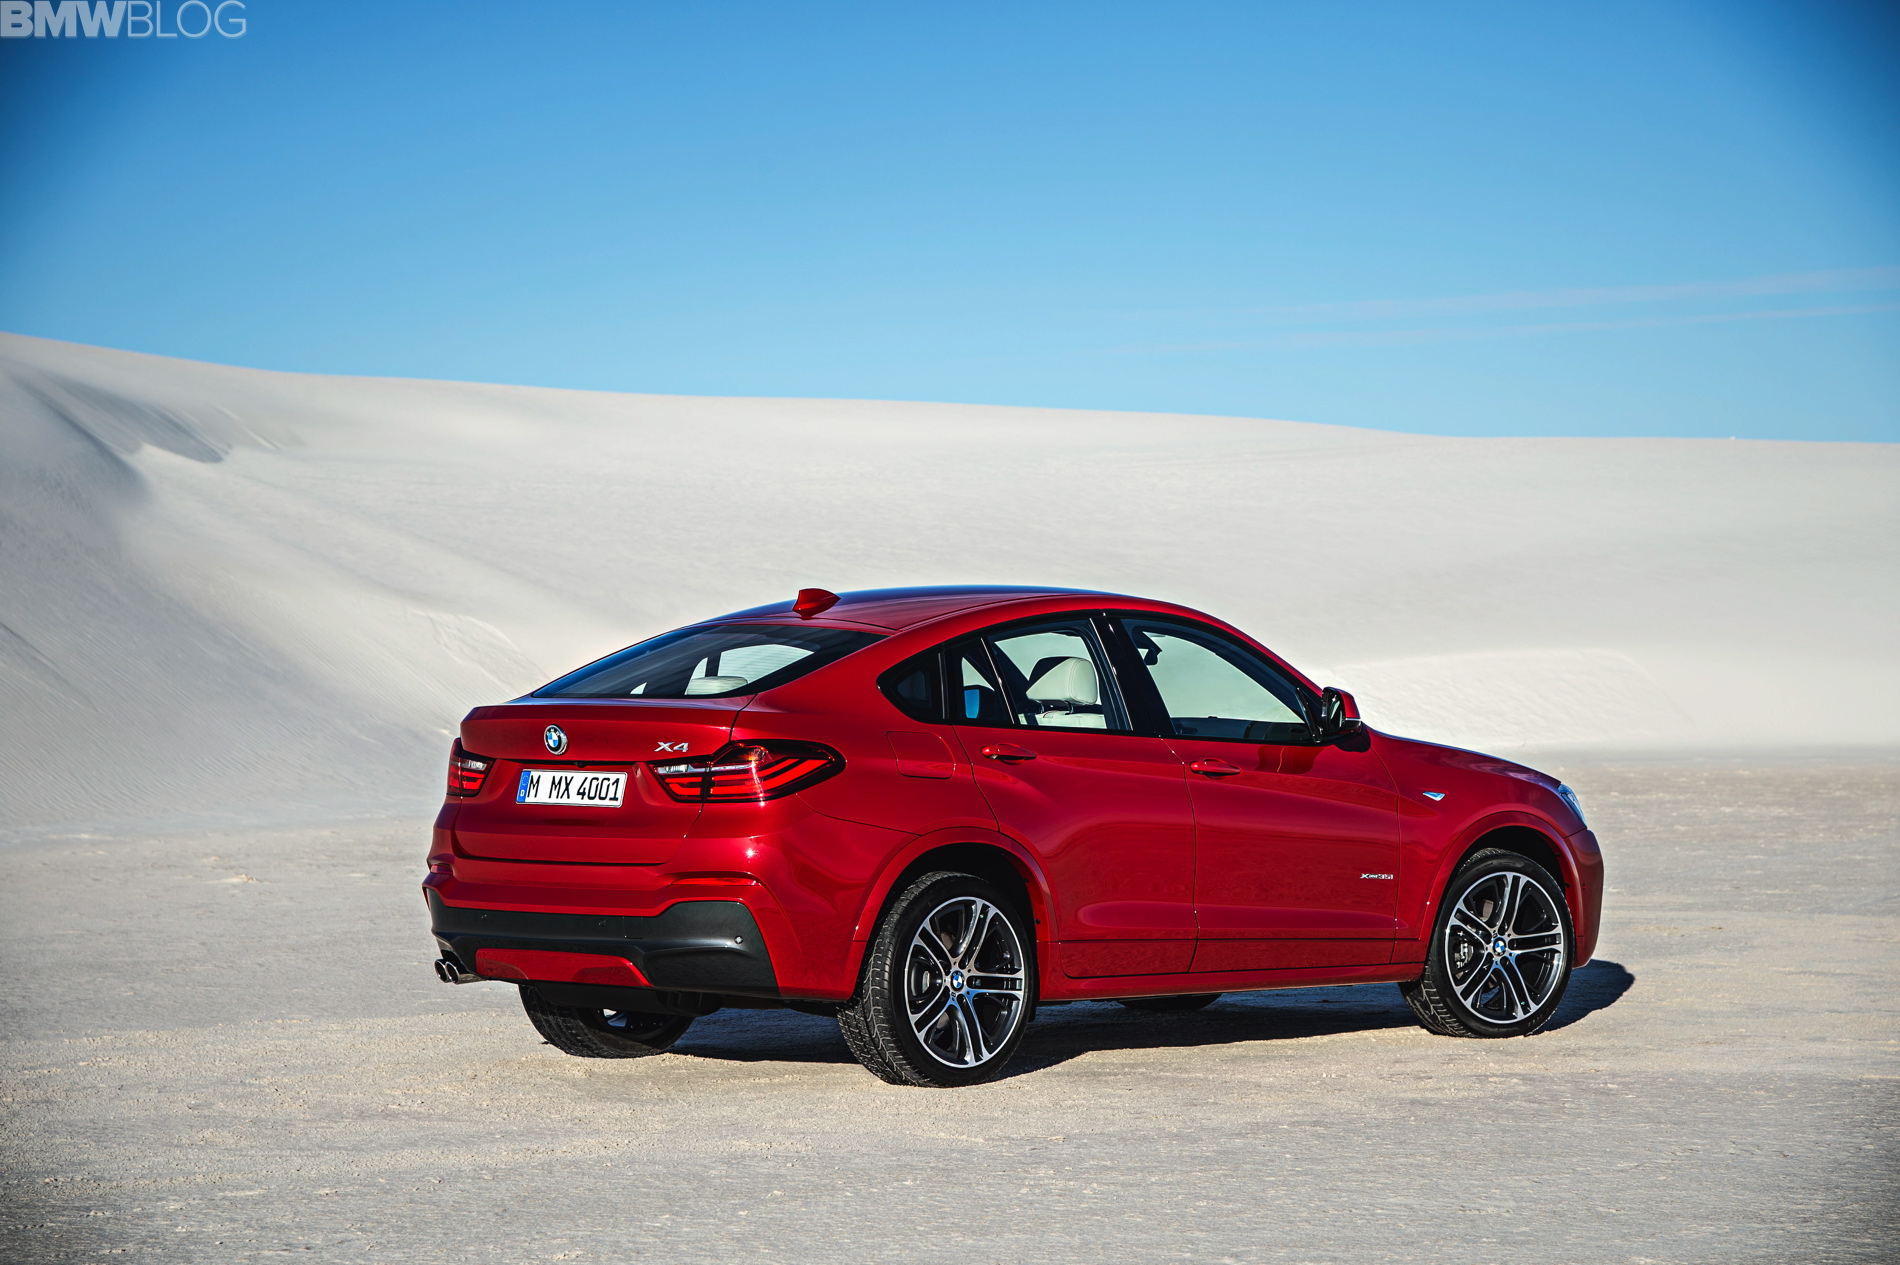 new bmw x 4 images 36